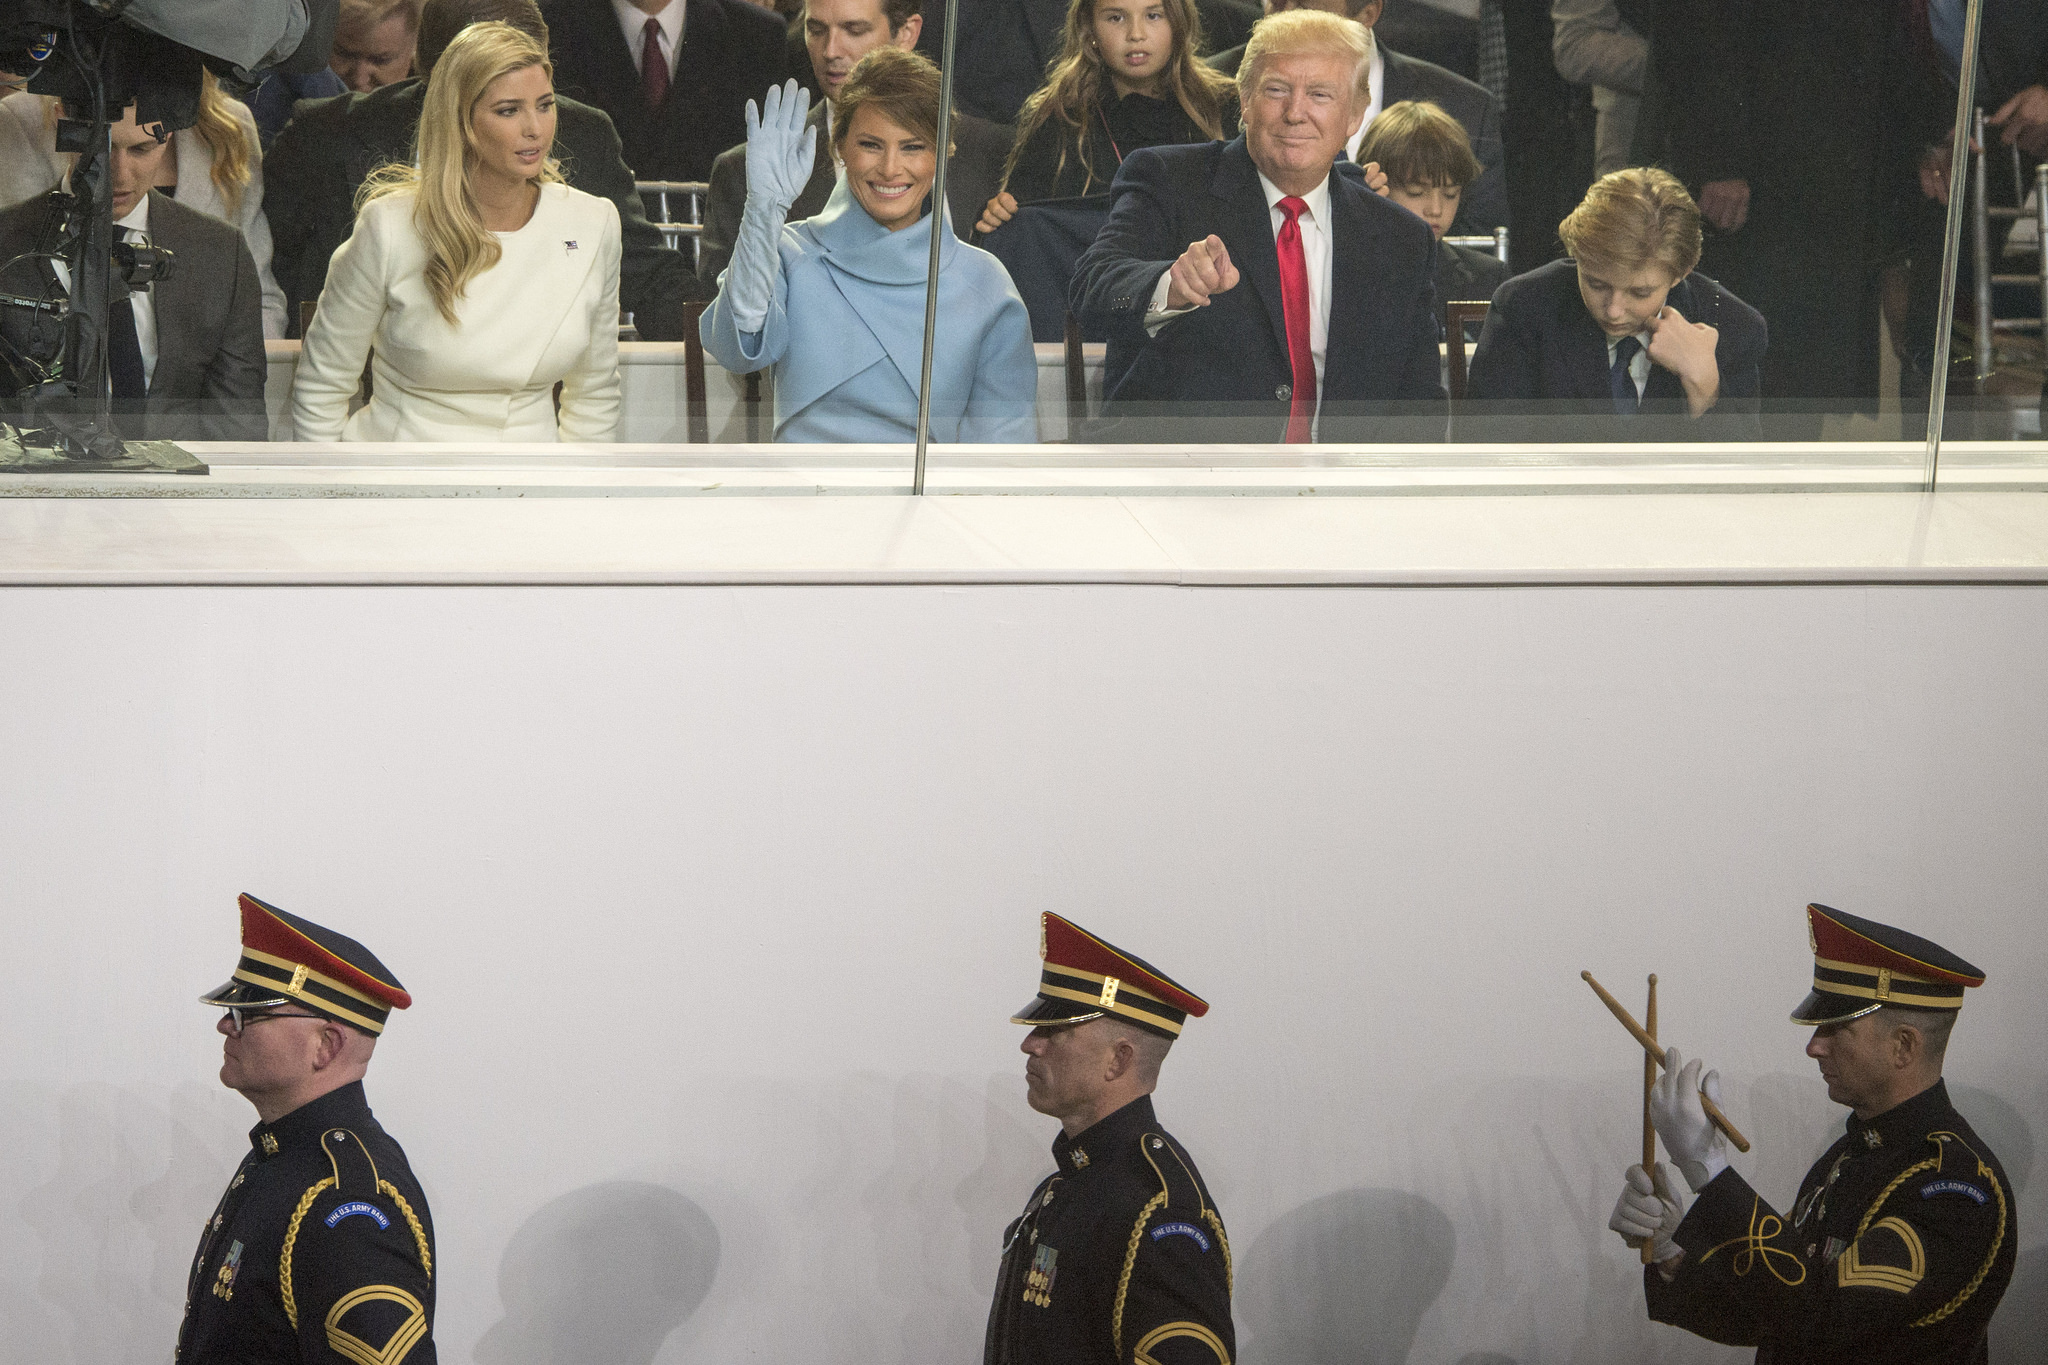 President Donald J. Trump and Vice President Michael Pence observe the 58th Presidential Inauguration Parade